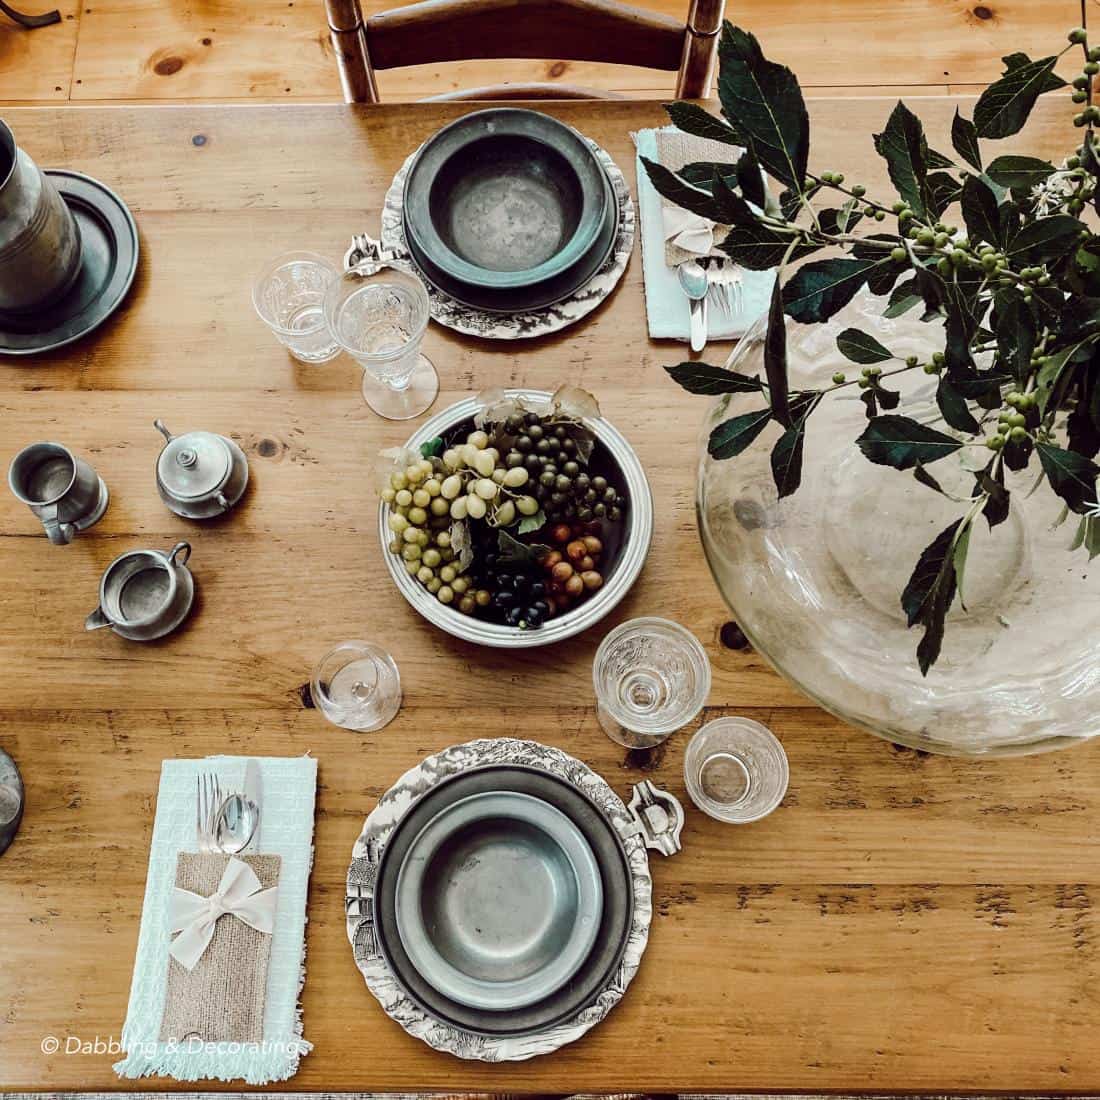 Decorating a Table with American Country Antiques